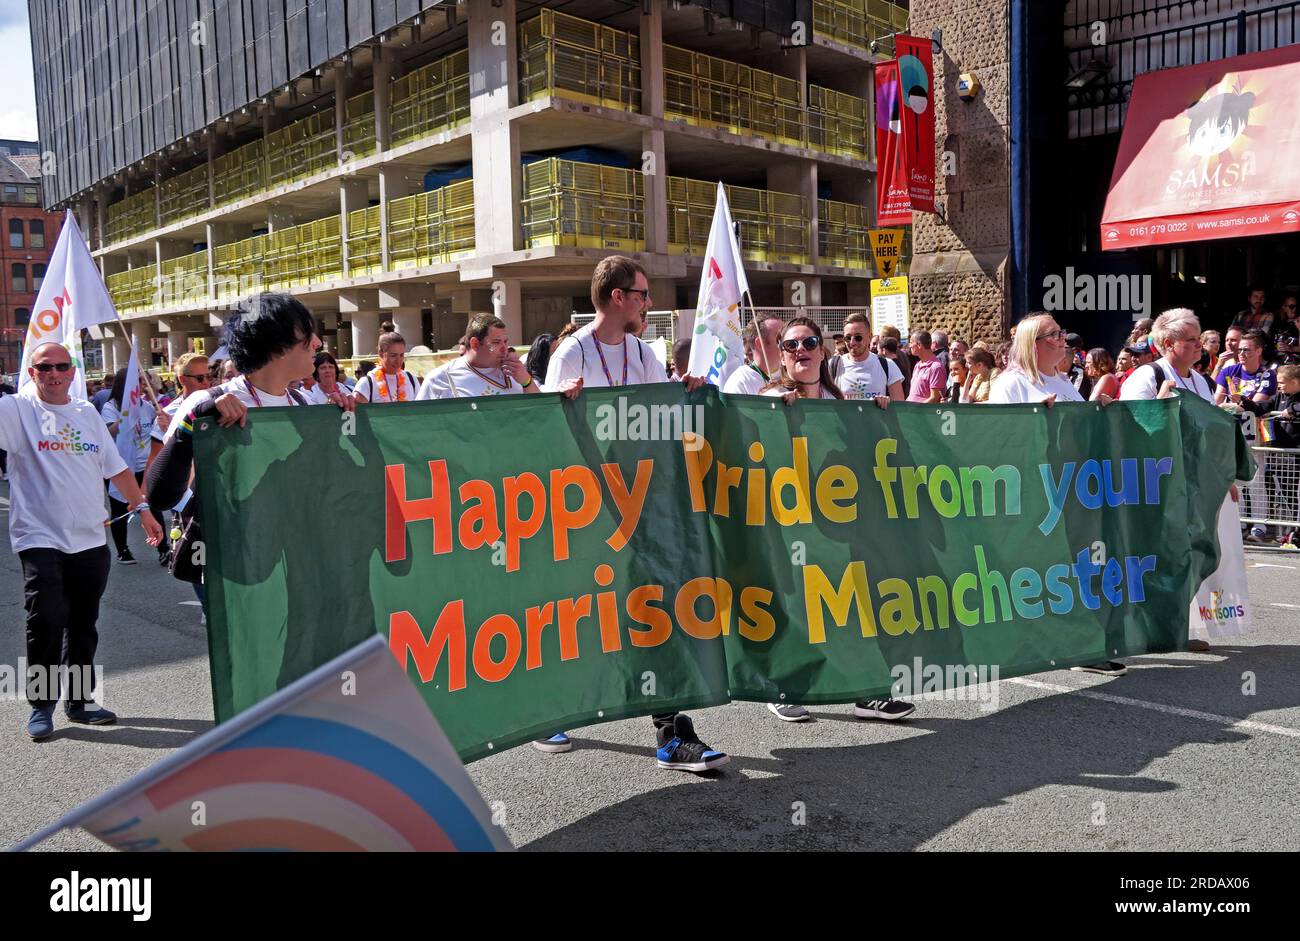 Happy Pride from Morrisons at Manchester Pride Festival parade, 36 Whitworth Street, Manchester,England,UK, M1 3NR Stock Photo